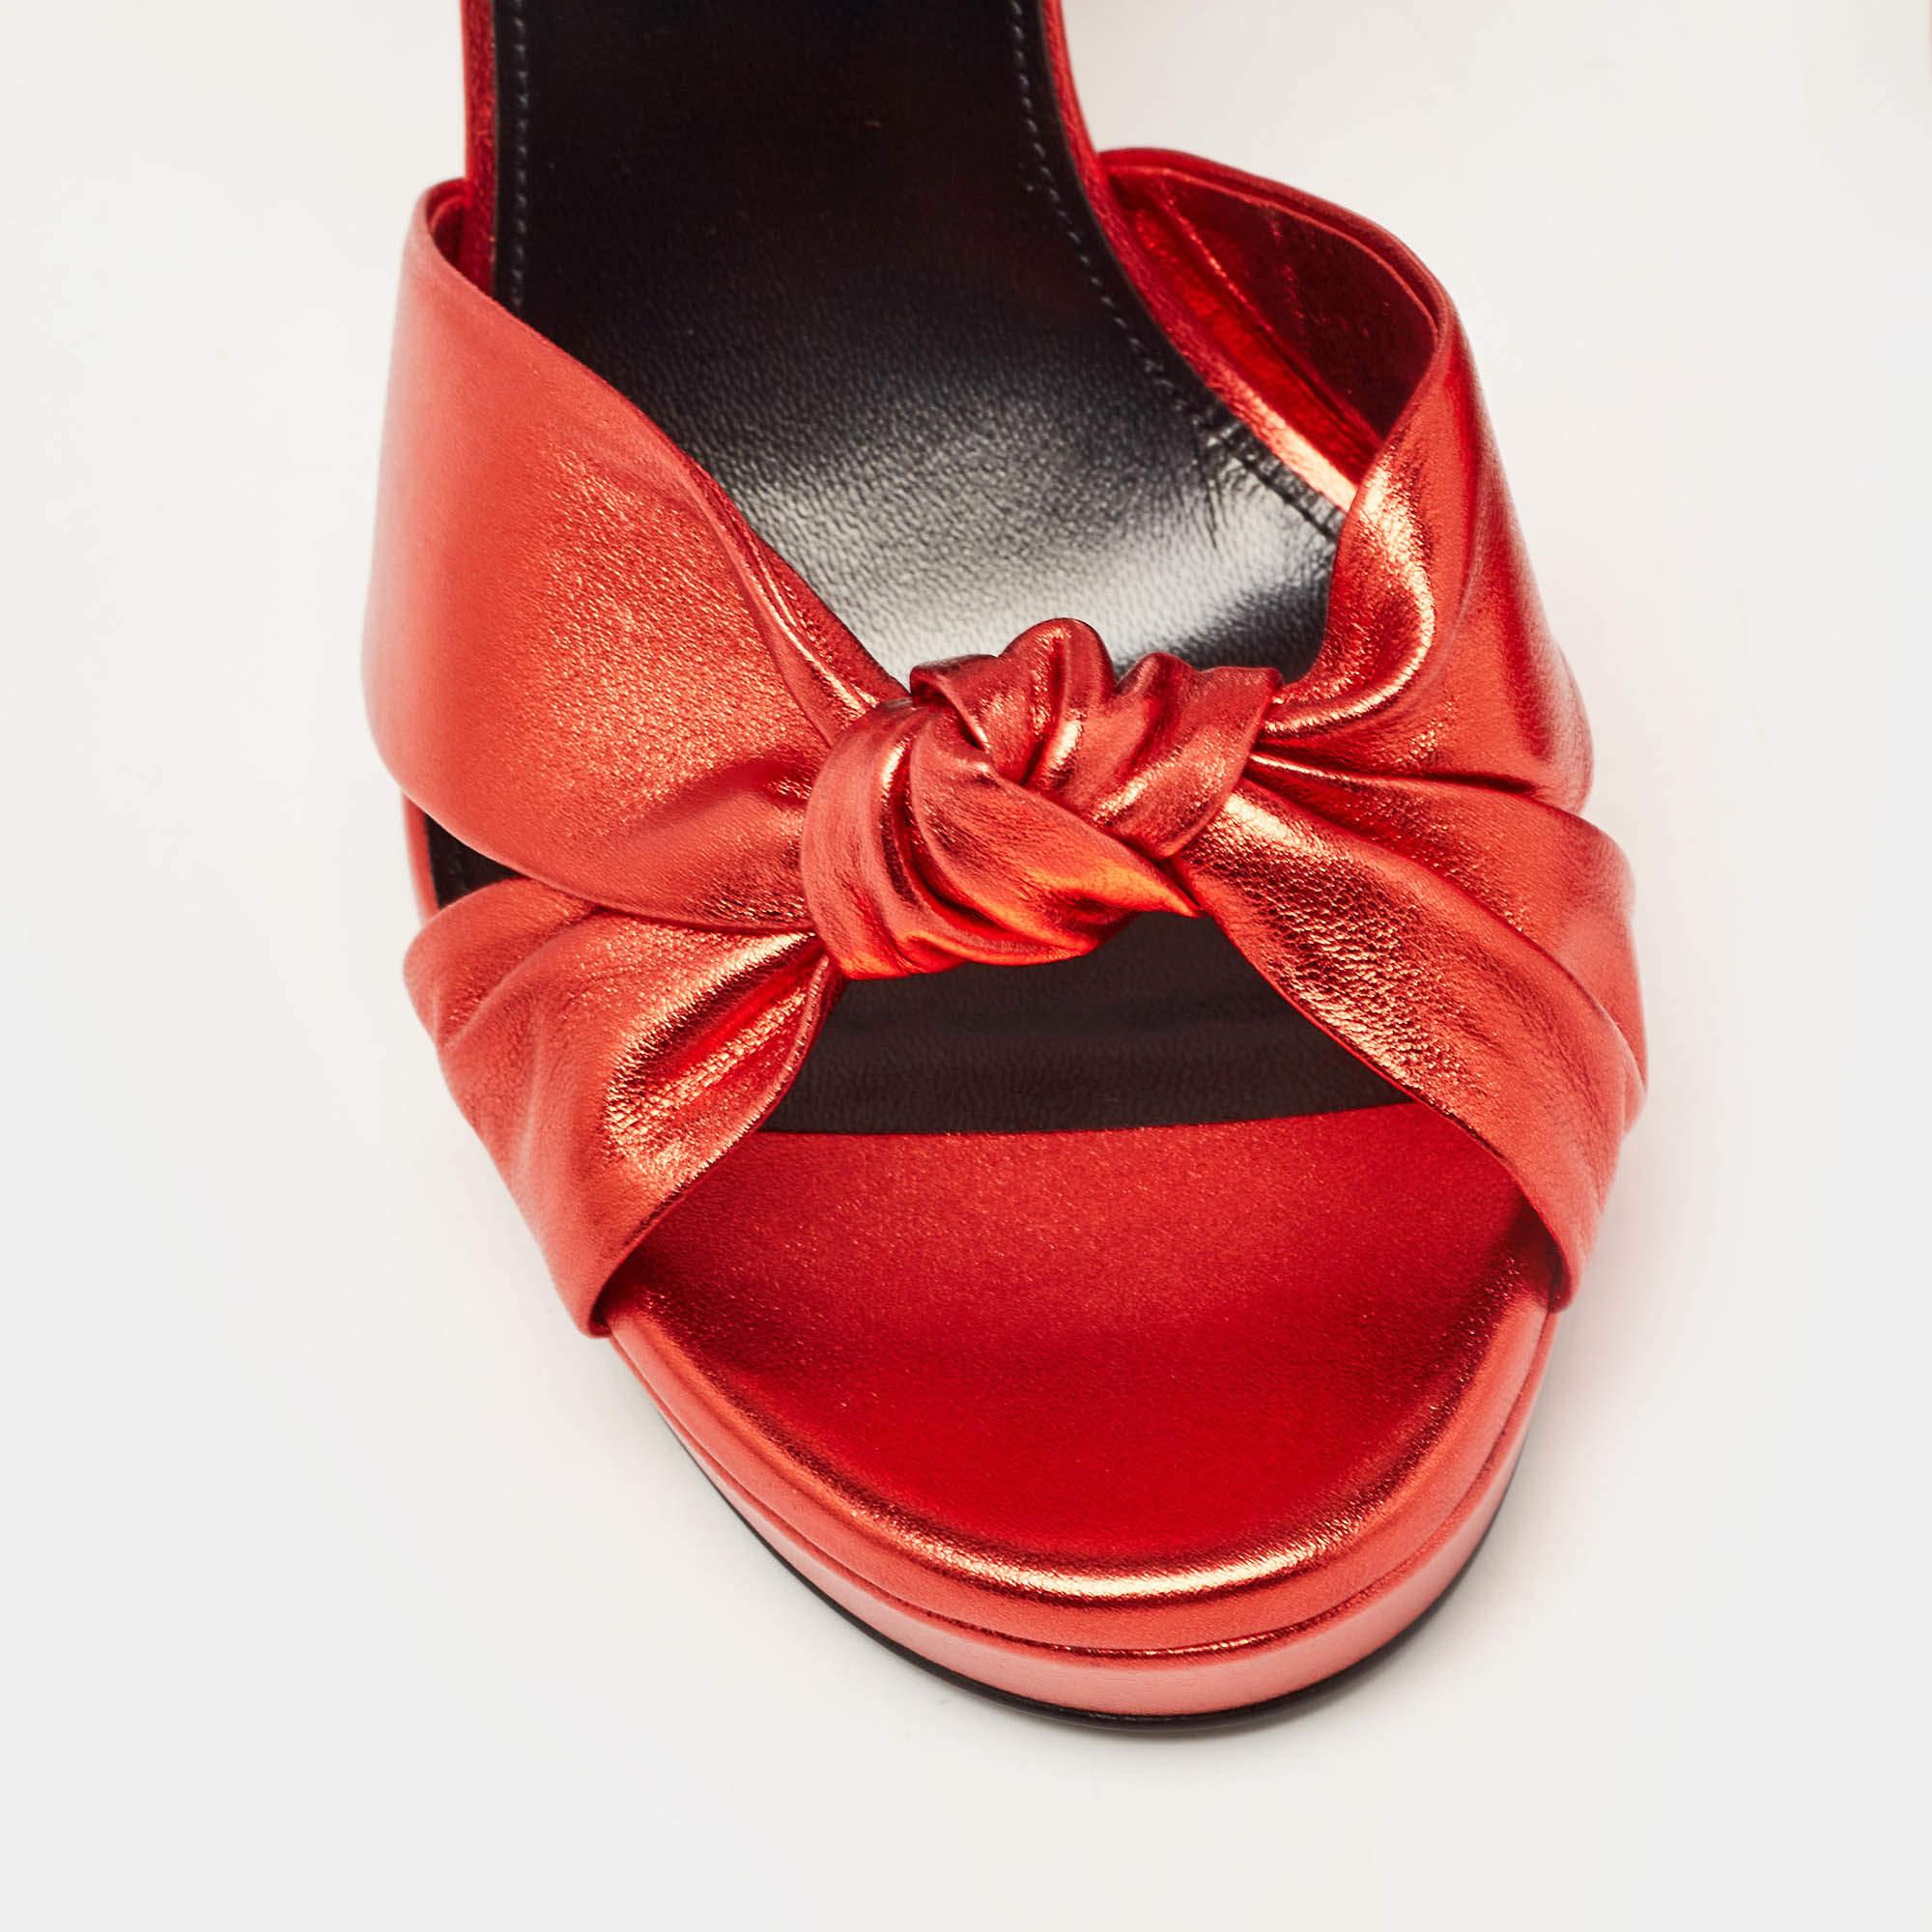 Yves Saint Laurent Red Leather Knotted Ankle Wrap Sandals Size 38 In Excellent Condition For Sale In Dubai, Al Qouz 2